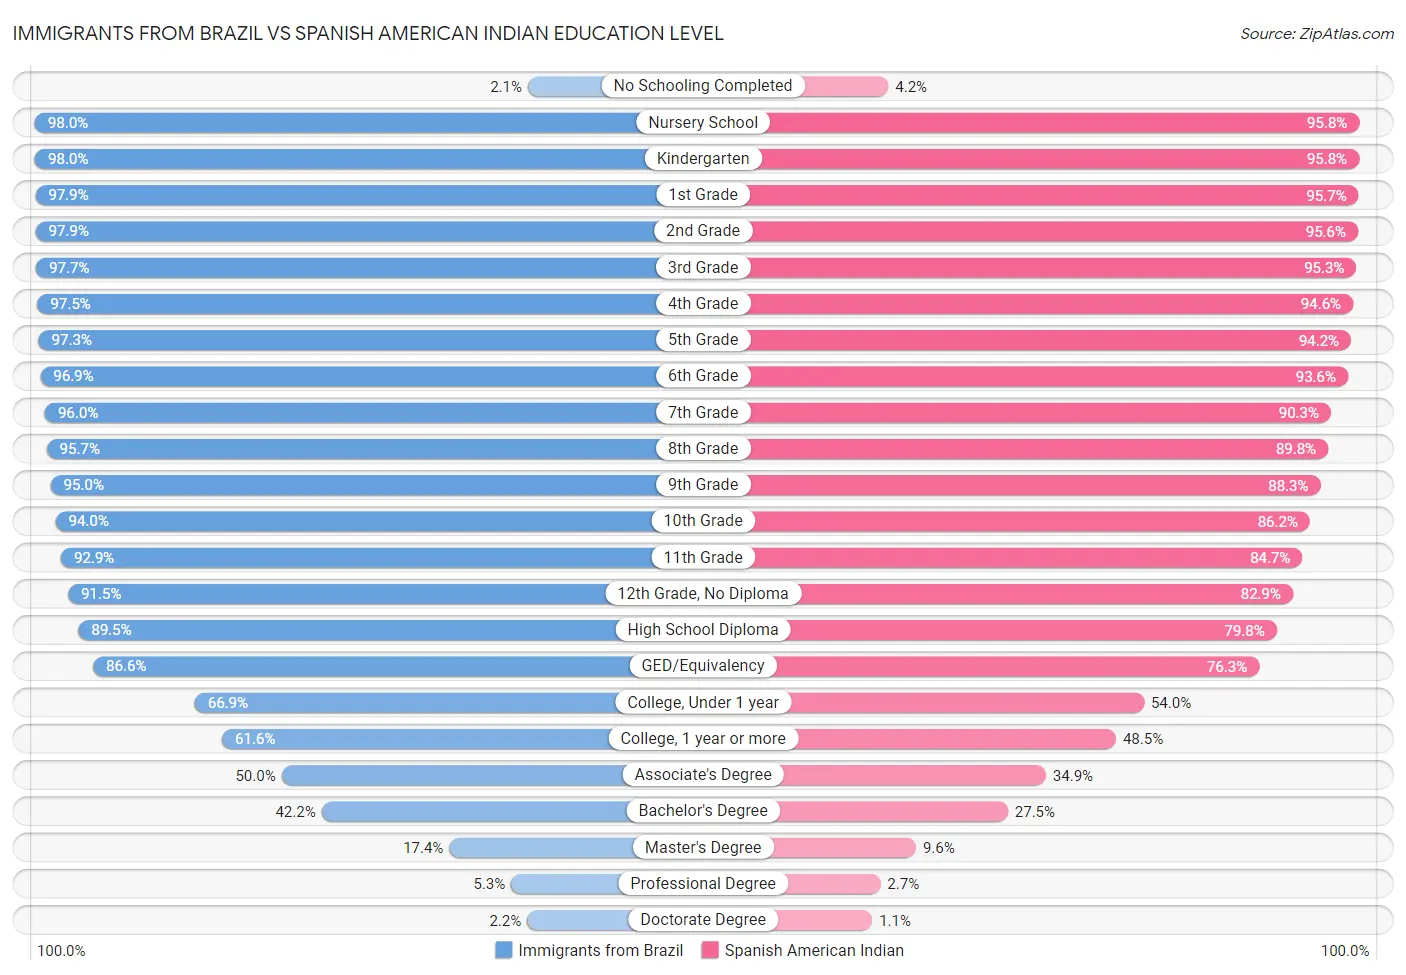 Immigrants from Brazil vs Spanish American Indian Education Level